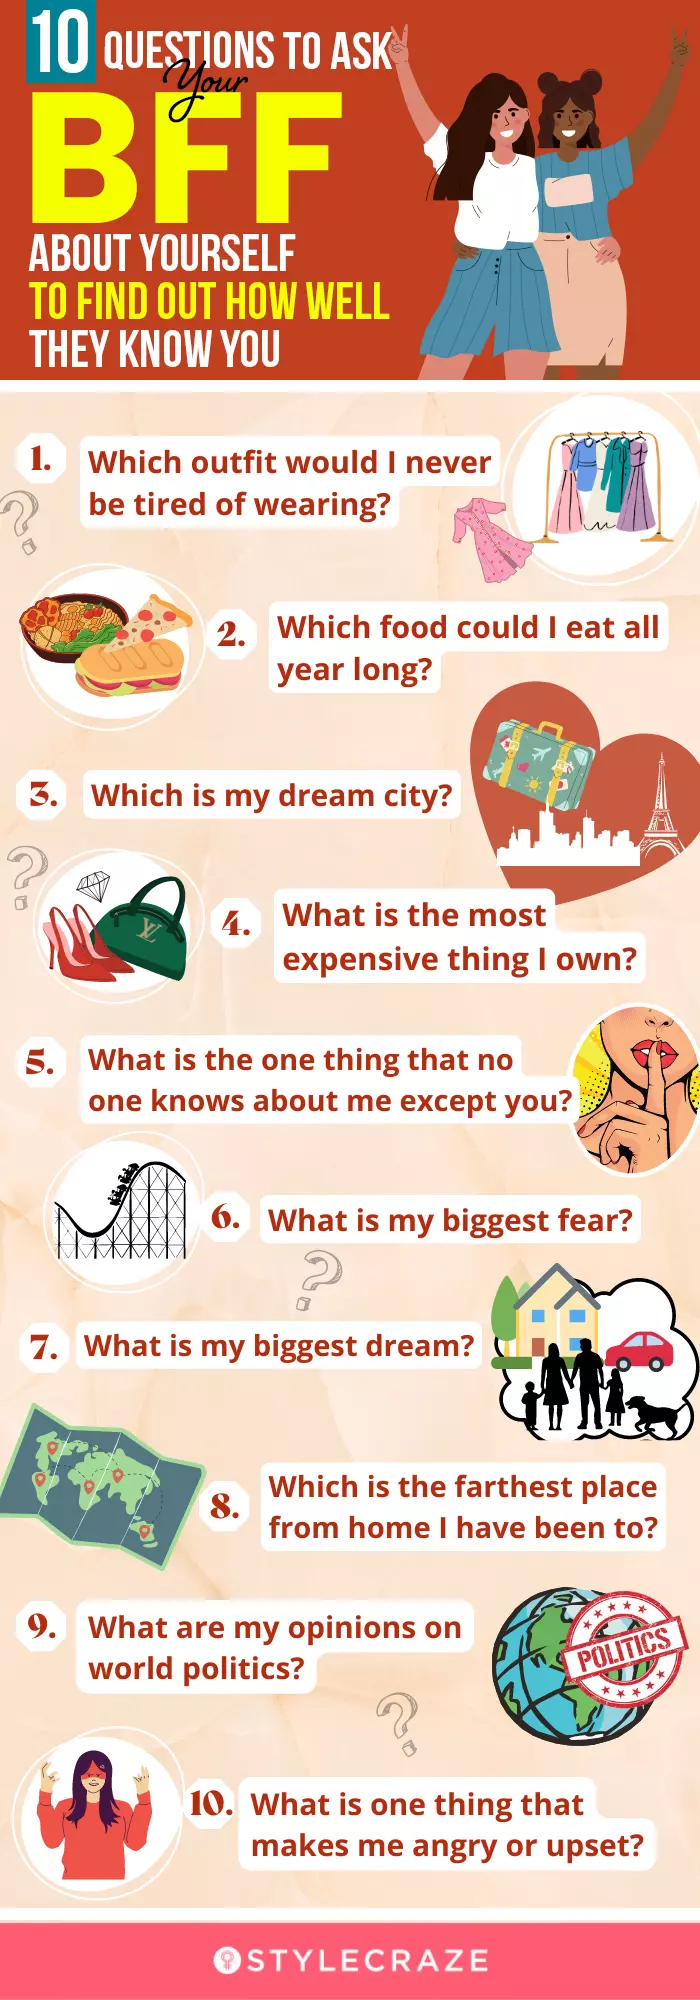 10 questions to ask your bff about yourself to find out how well they know you (infographic)